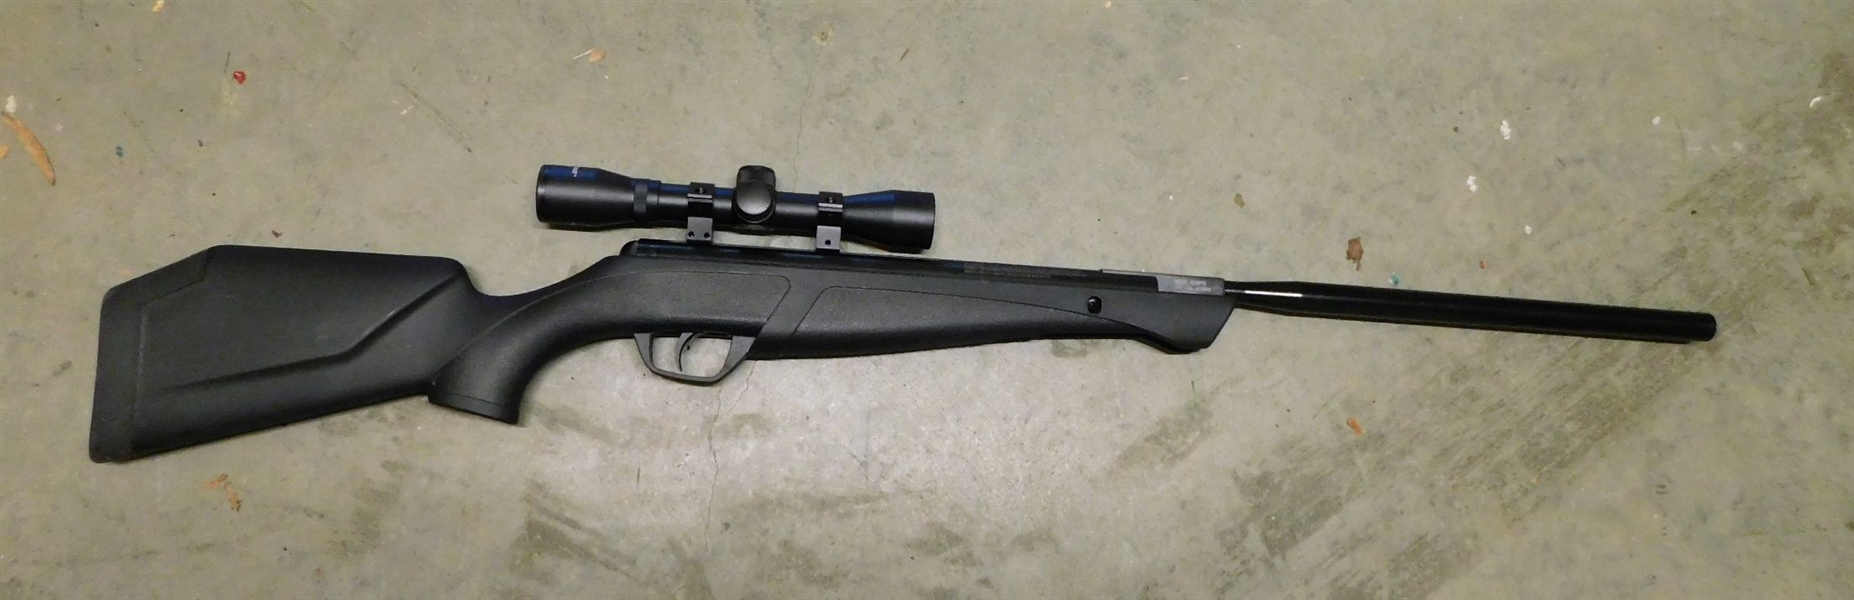 Benjamin Charger .177 Cal Pellet Gun with Center Point Scope 4x32